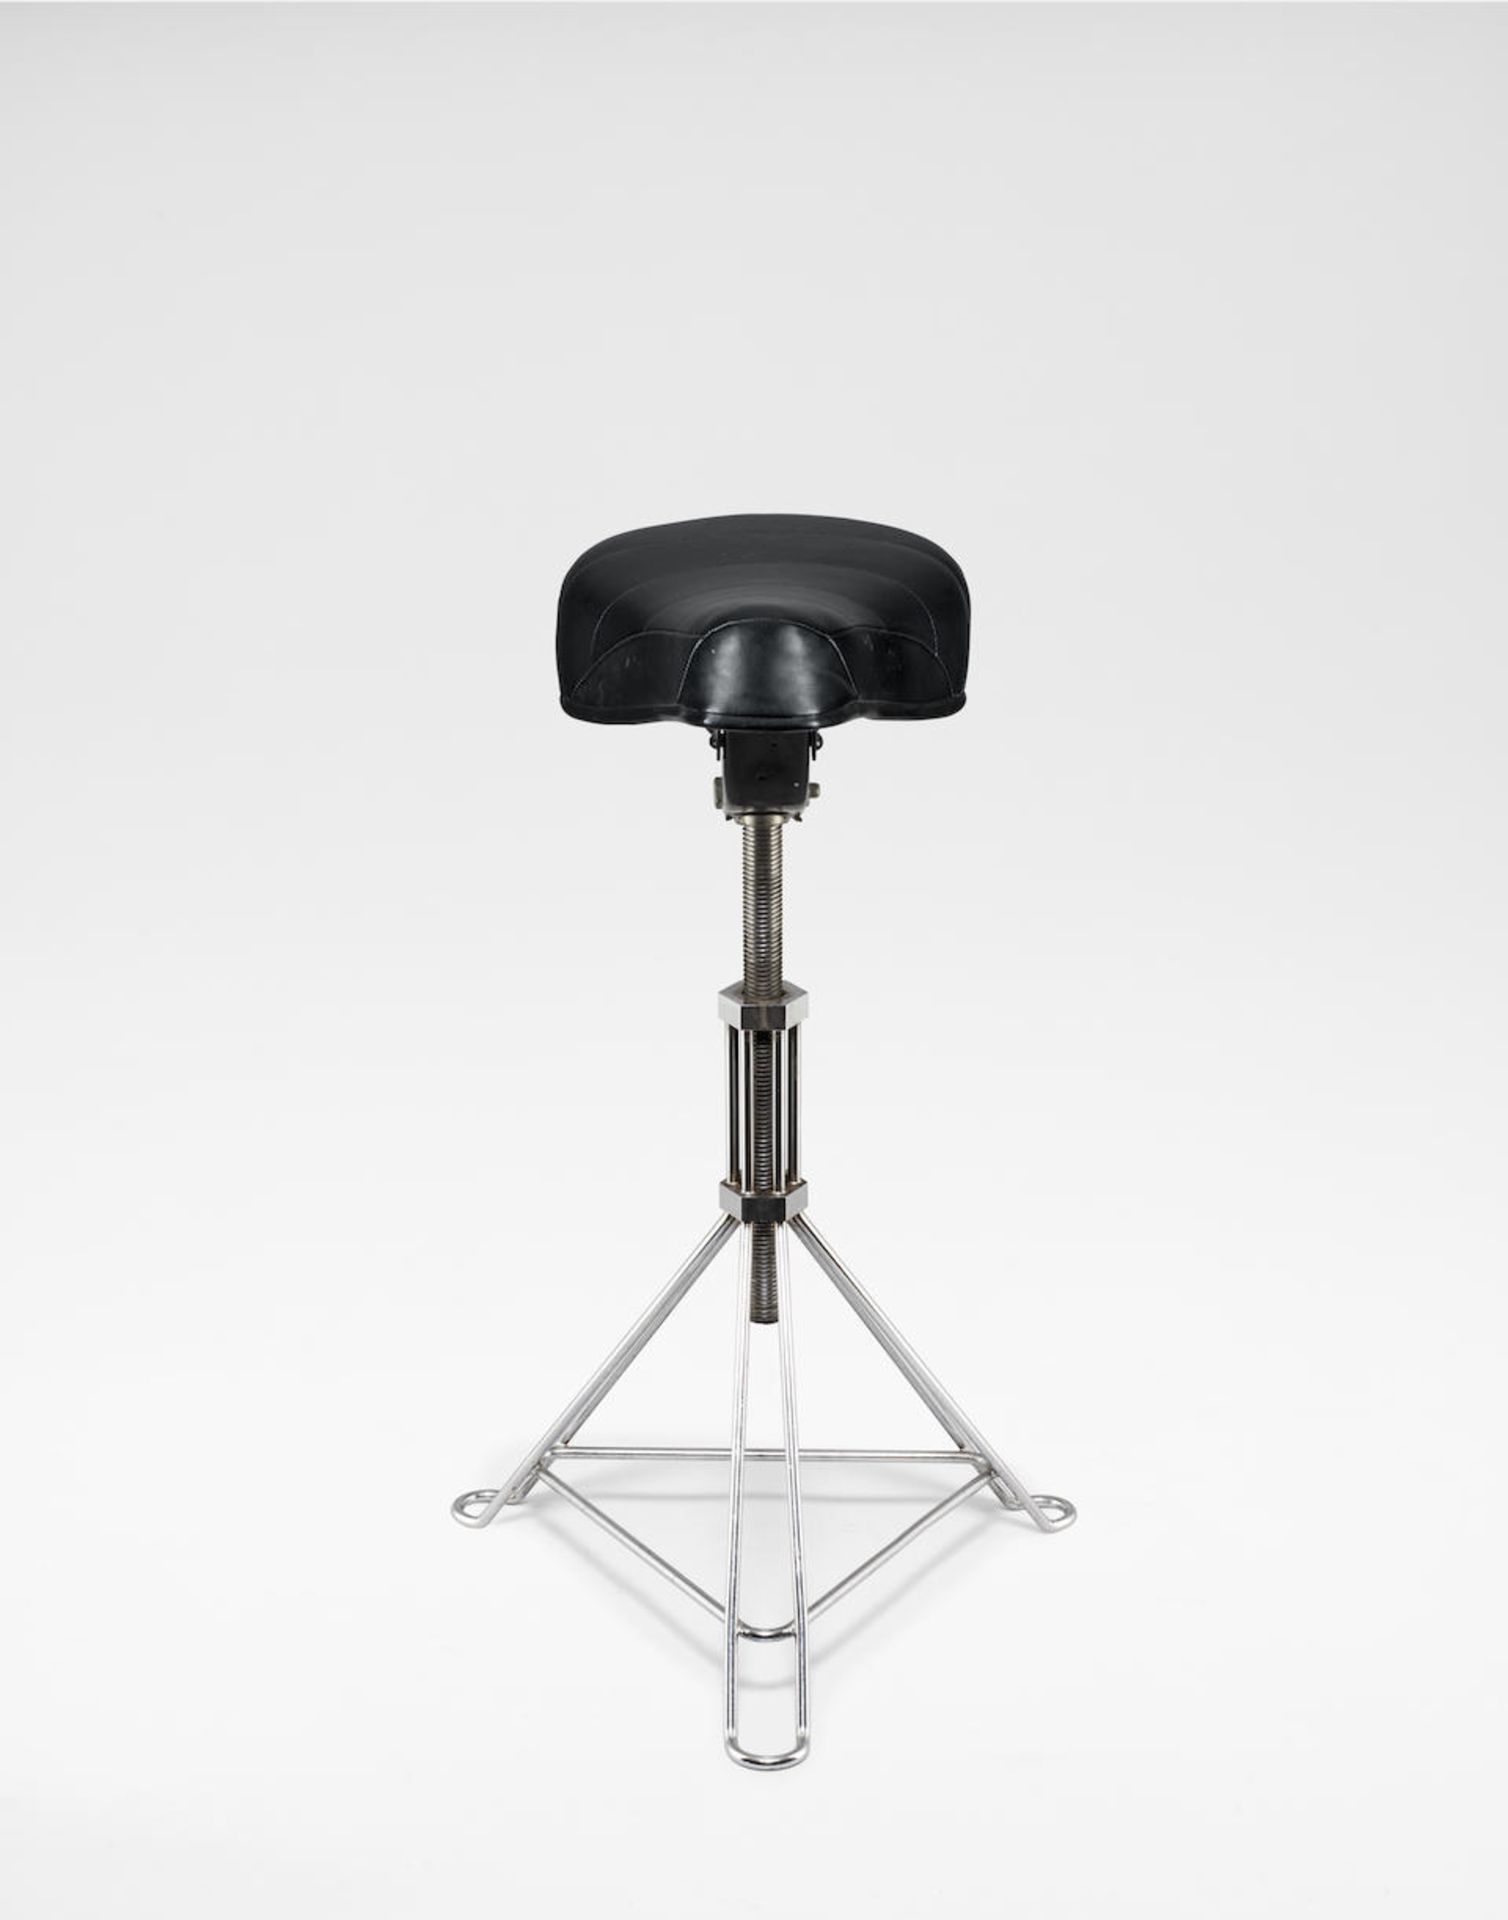 Ron Arad 'Puch' stool, 1981 - Image 2 of 3